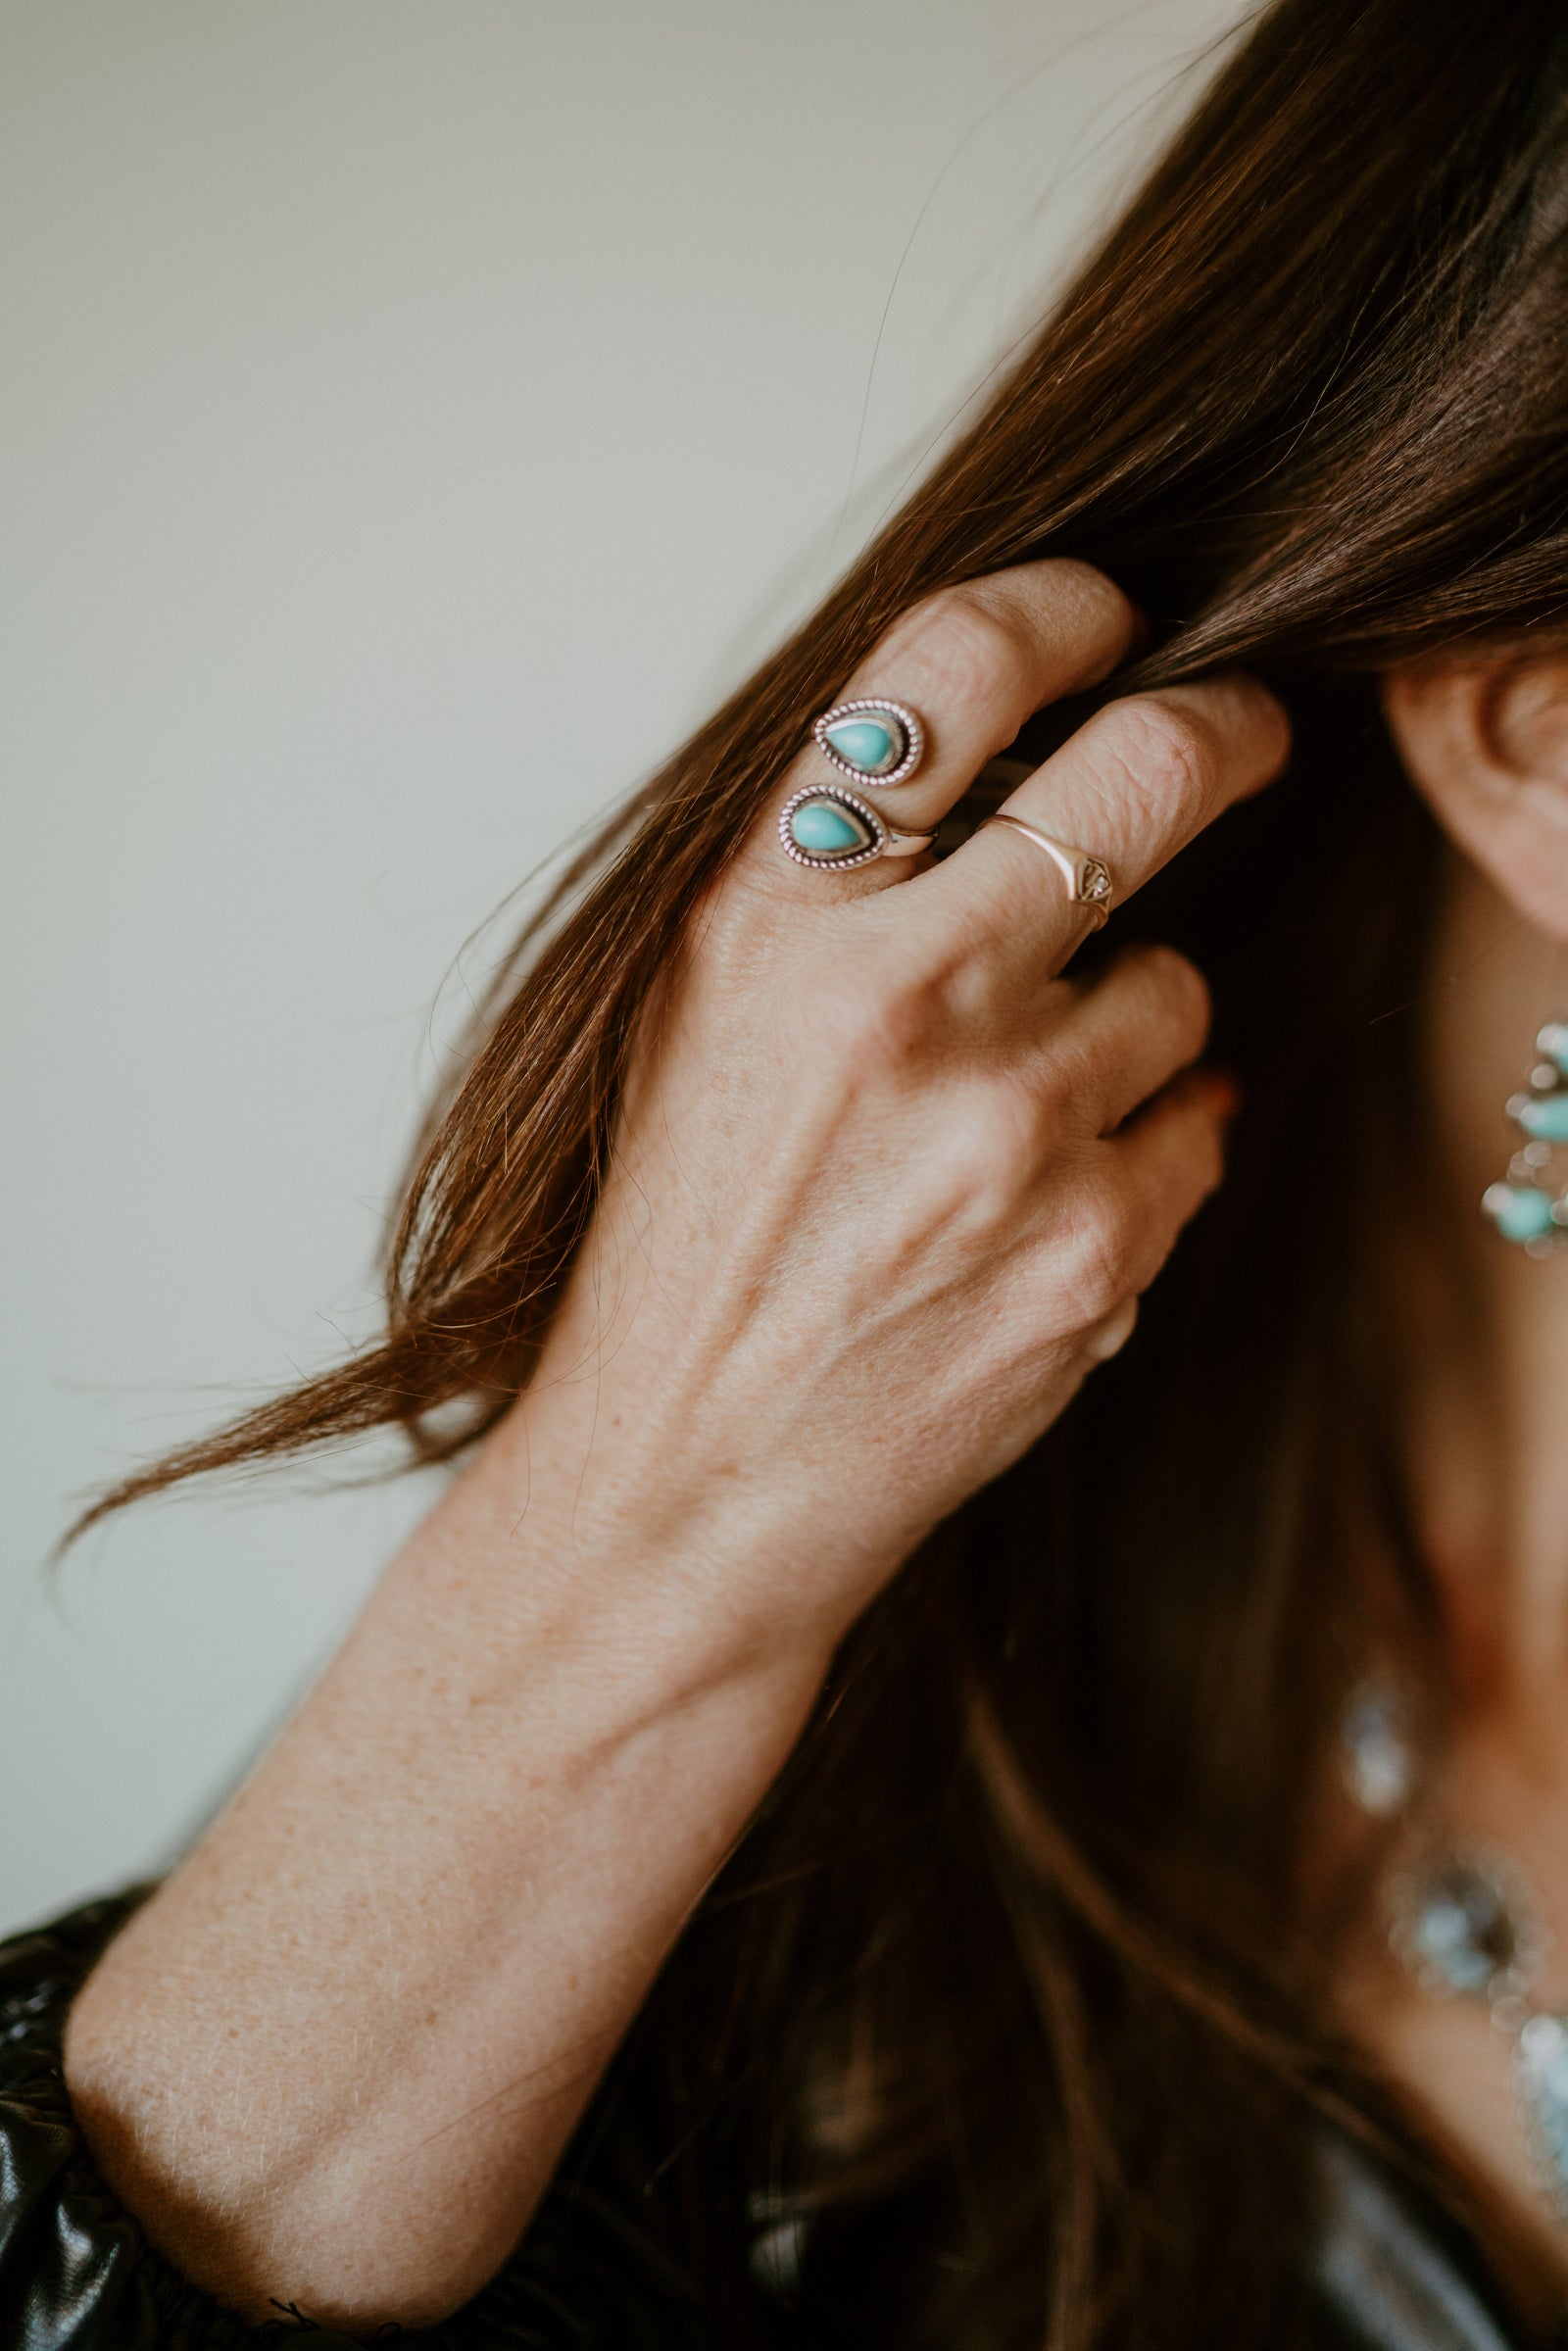 Wallace Ring | Turquoise